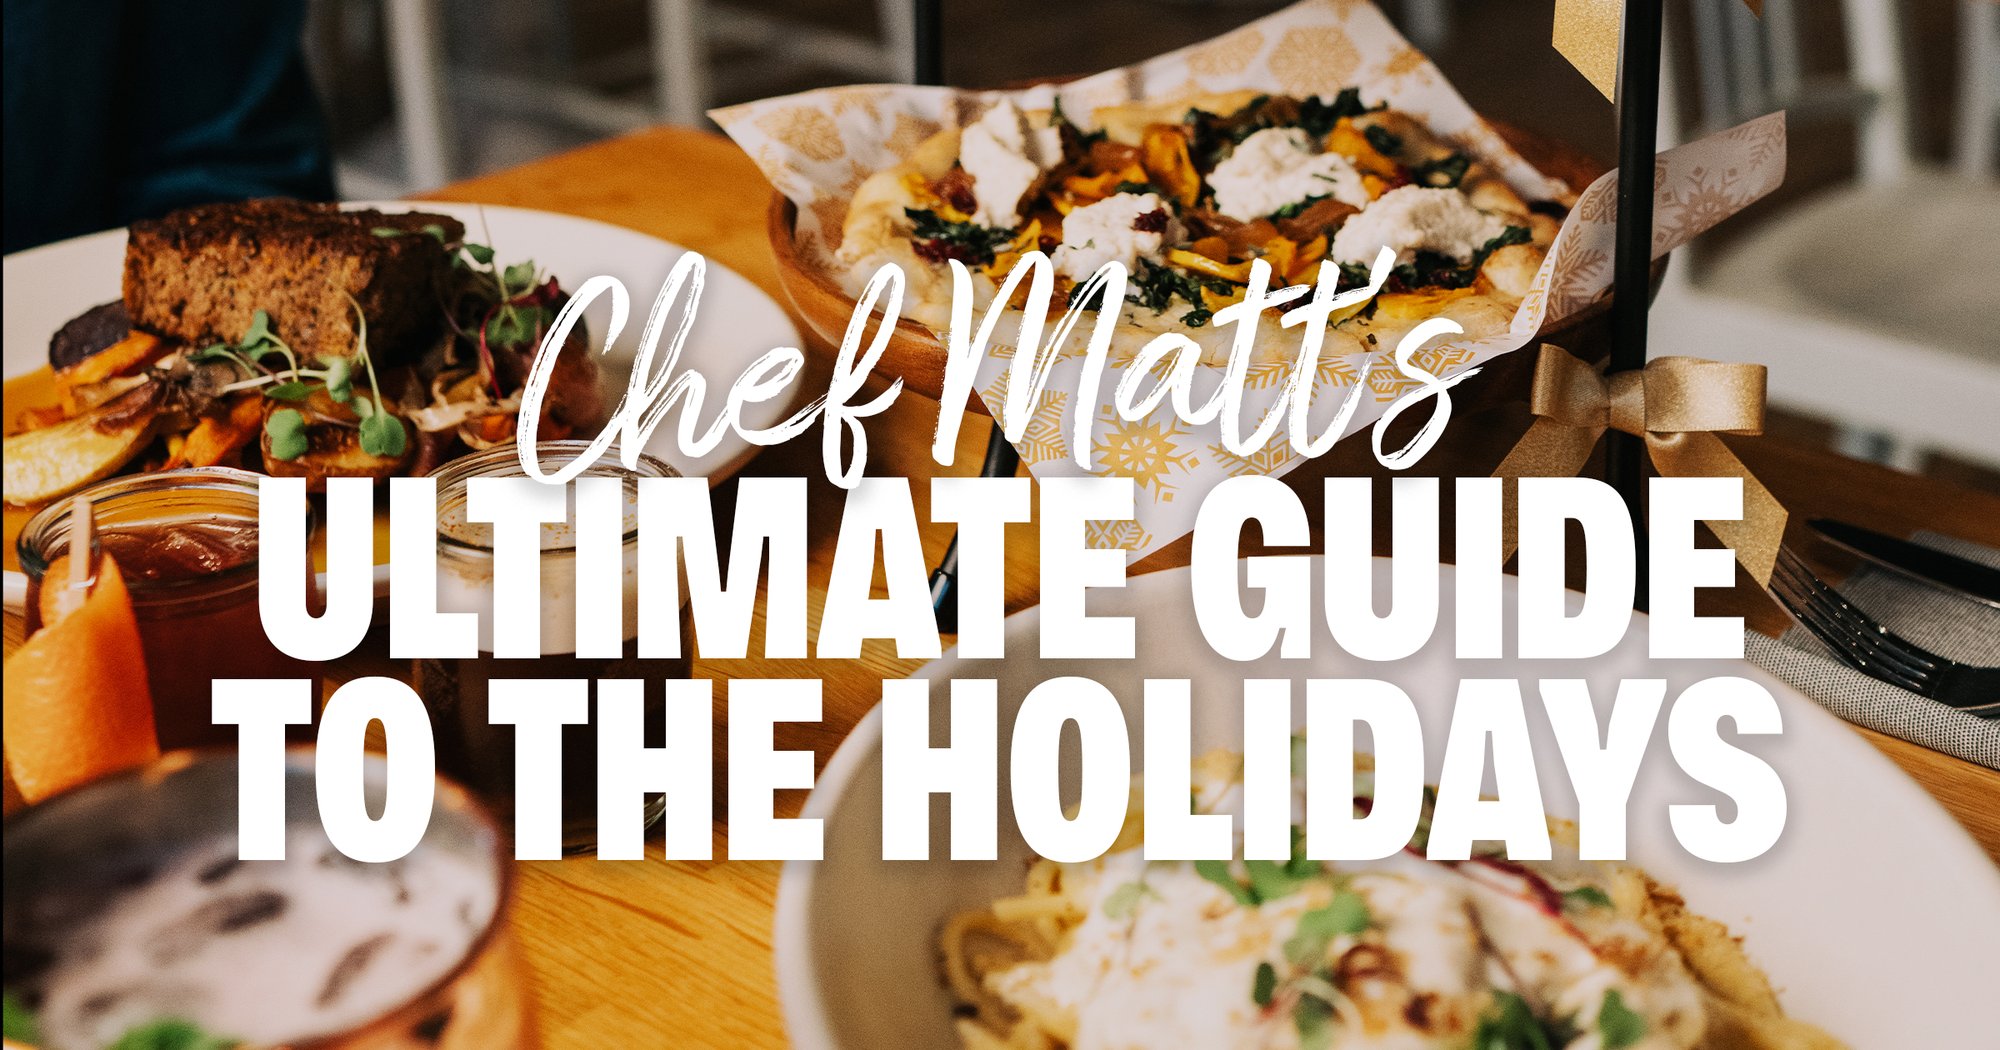 Chef Matts Ultimate Guide to the Holidays